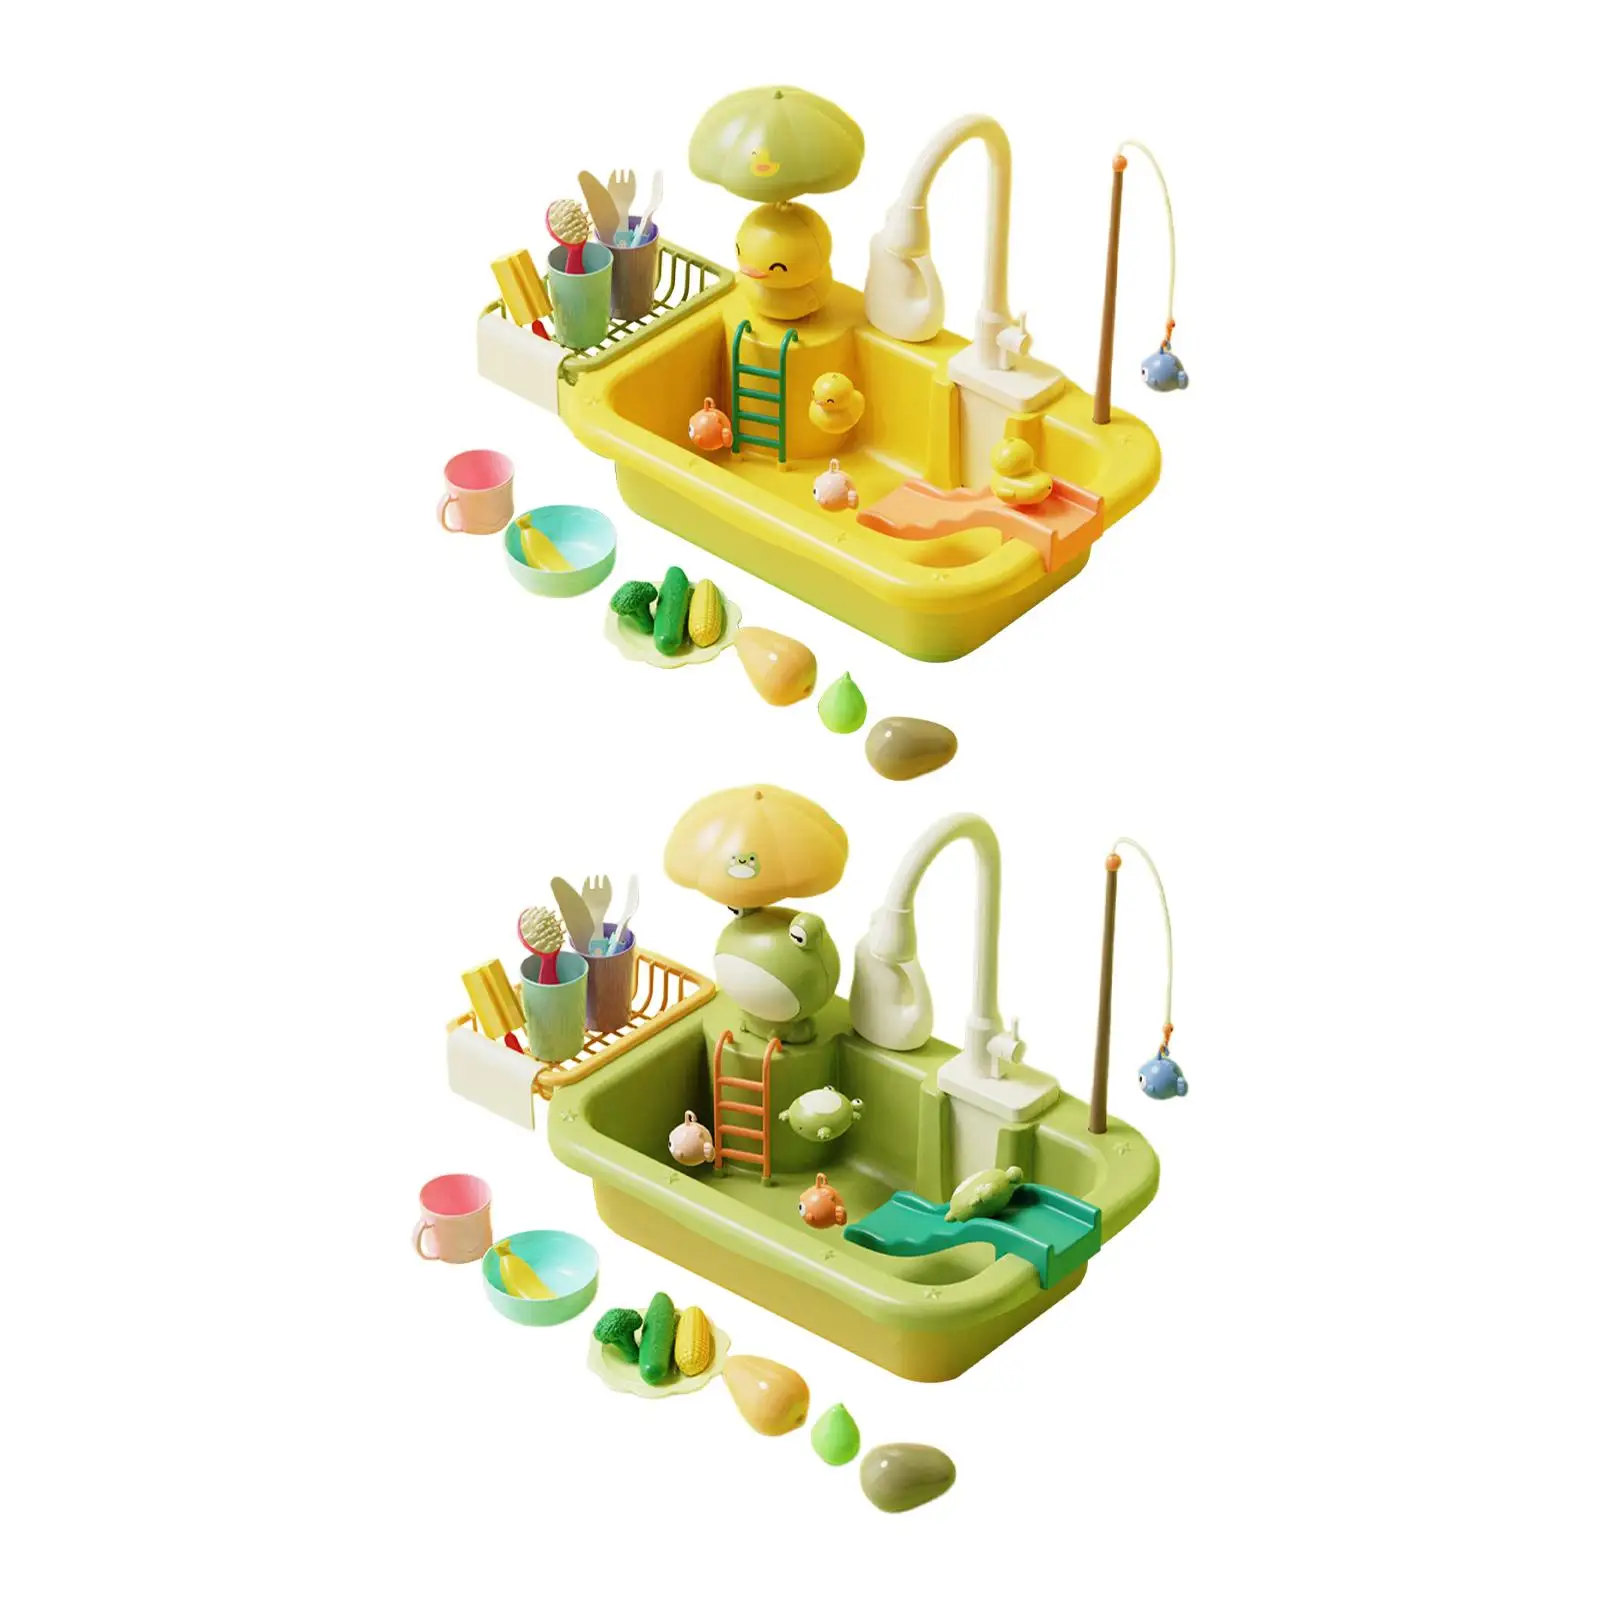 Kitchen Sink Toys Automatic Water Cycle System Pretend Play Faucet and Dishes Playset for Unisex Girls Boys Gifts